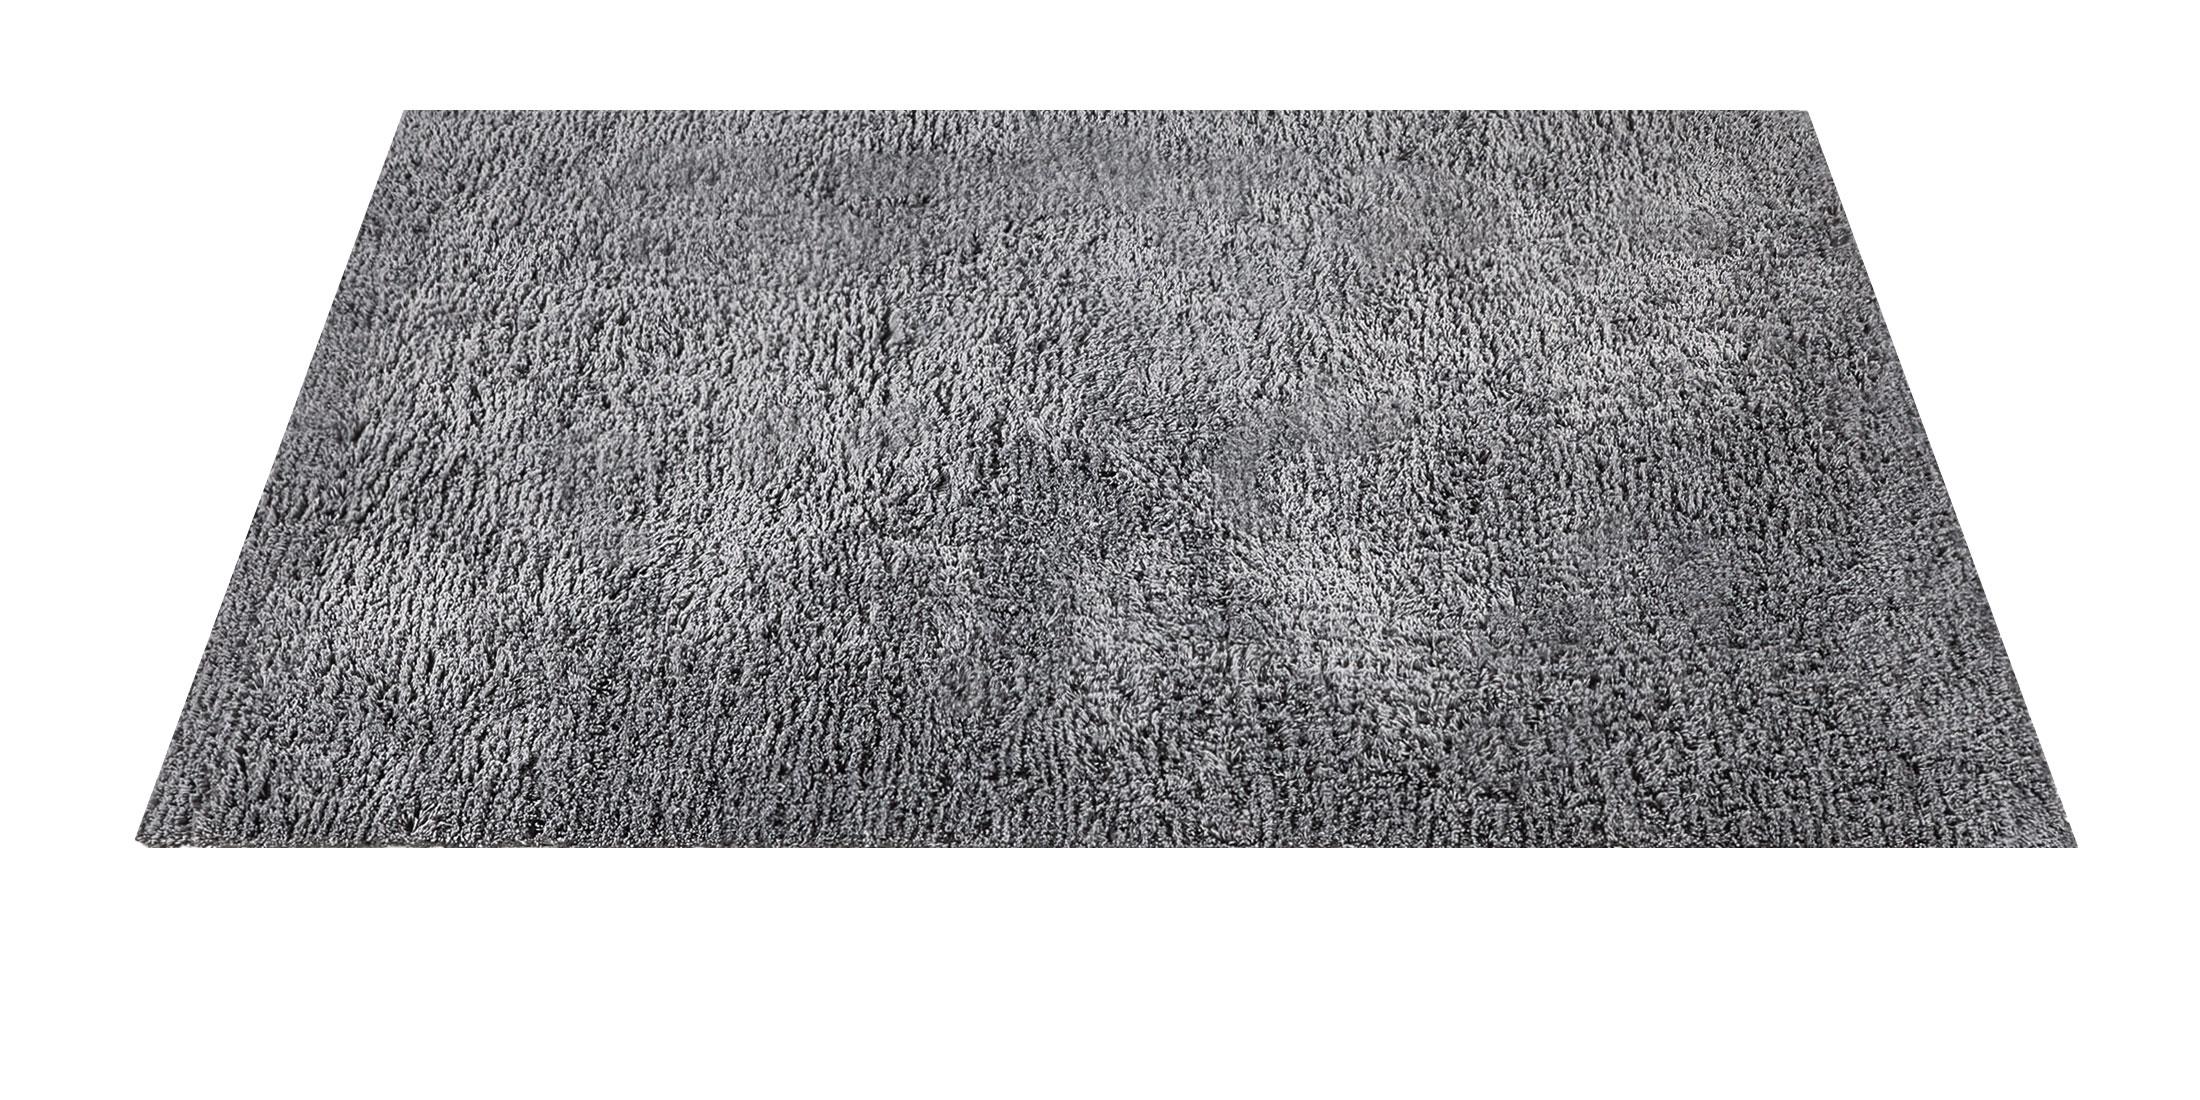 For Sale: Gray (Nickel/Carbon) Ben Soleimani Performance Shag Rug– Hand-woven Ultra-plush 12'x15' 2